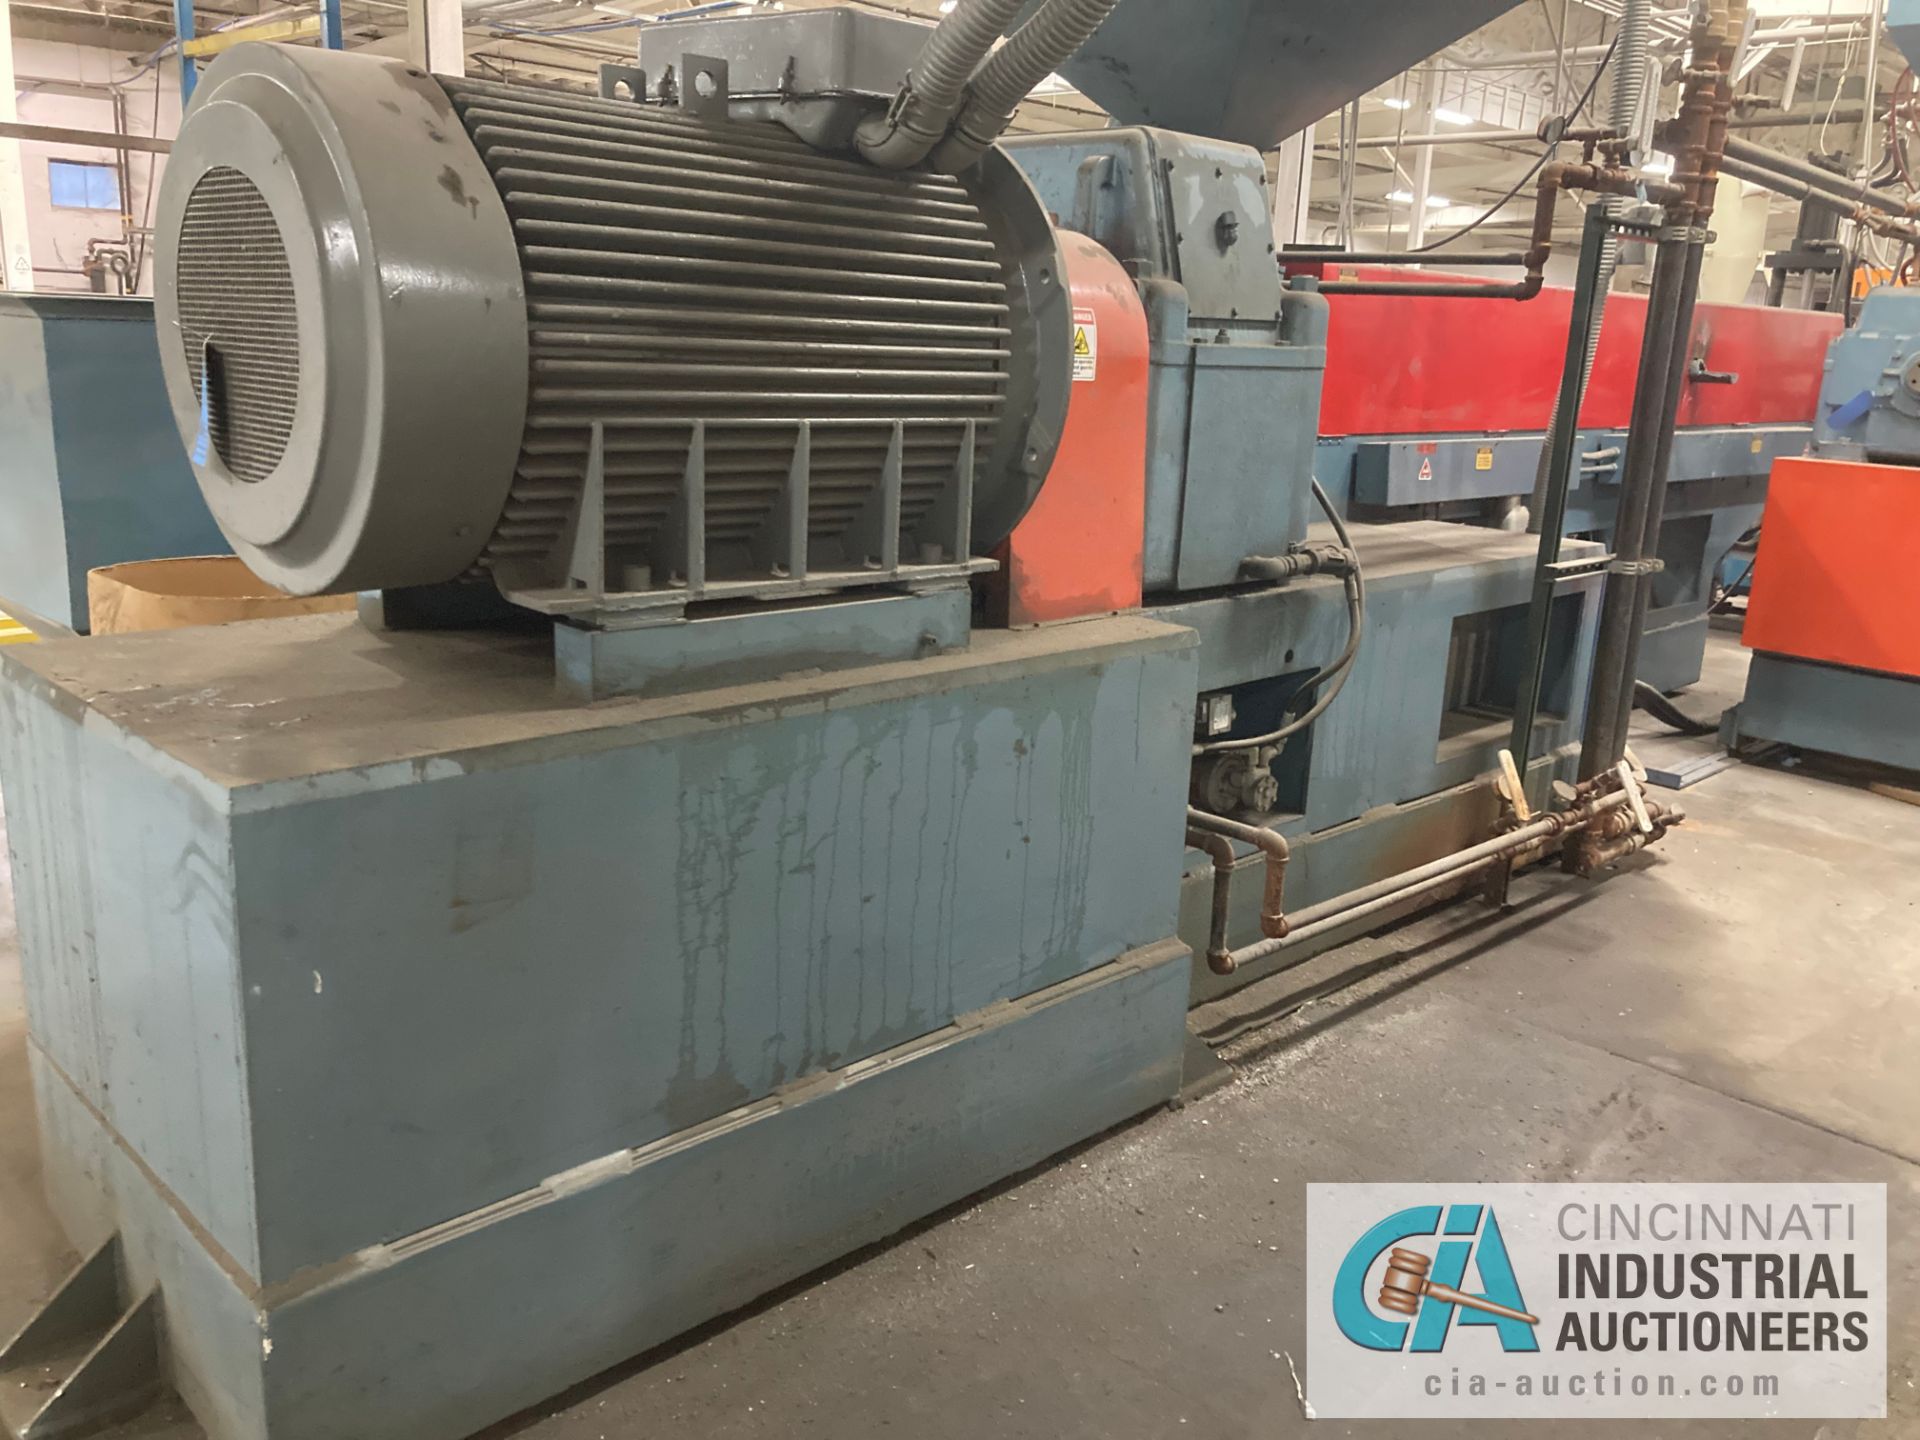 6" JOHNSON SINGLE SCREW EXTRUDER; S/N 4348-47, 30.1 L/D RATIO VENTED BARREL, 13.95 GEARBOX RATIO, - Image 2 of 15